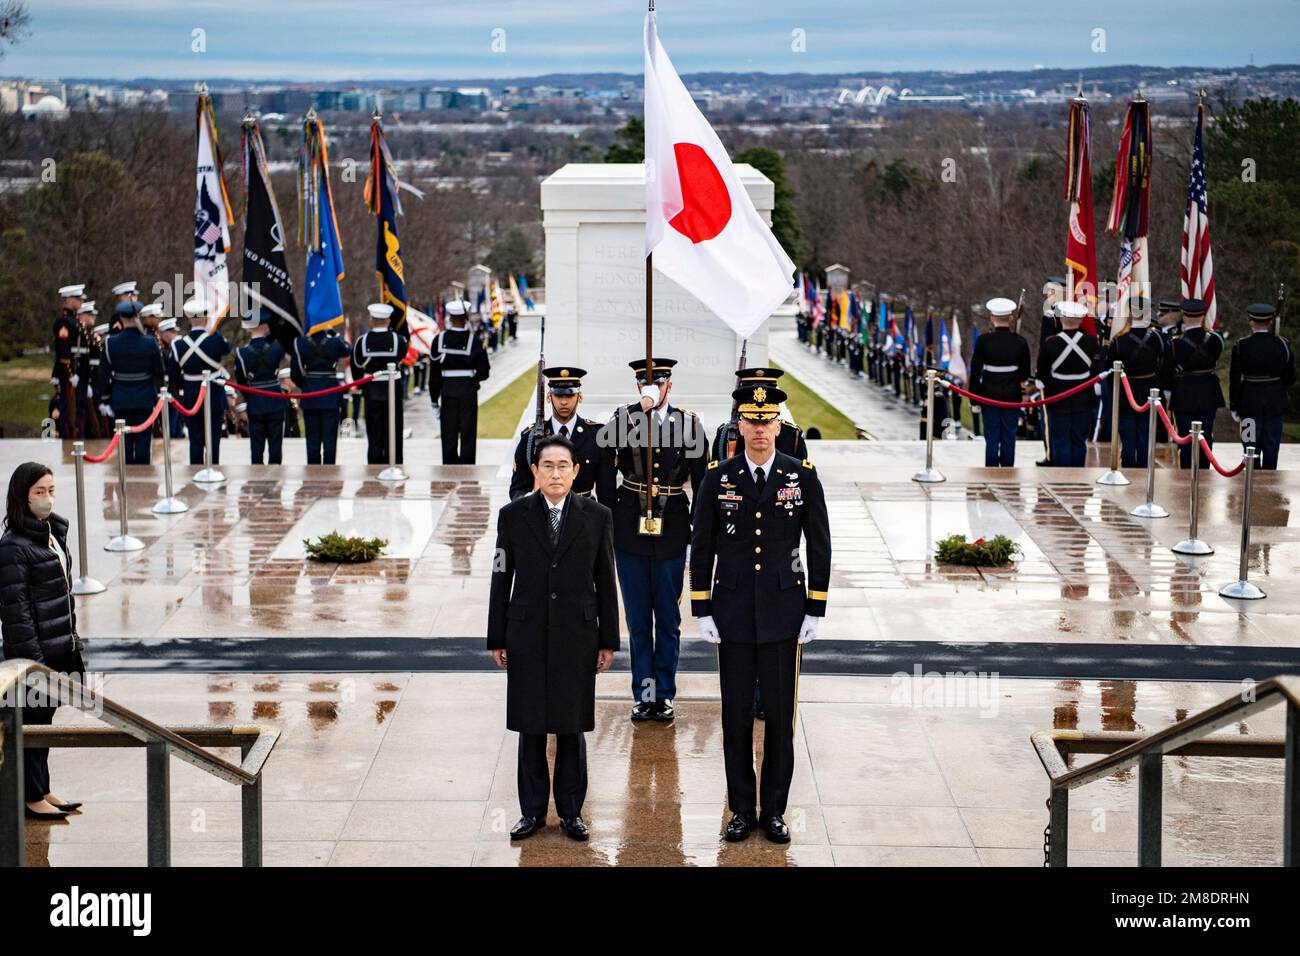 Arlington, USA. 13th Jan, 2023. Arlington, USA. 13 January, 2023. Japanese Prime Minister Fumio Kishida, left, escorted by U.S Army Maj. Gen. Allan Pepin participates in an Armed Forces Full Honors Wreath-Laying Ceremony at the Tomb of the Unknown Soldier at Arlington National Cemetery, January 13, 2023 in Arlington, Virginia, USA. Credit: Elizabeth Fraser/U.S. Army/Alamy Live News Stock Photo